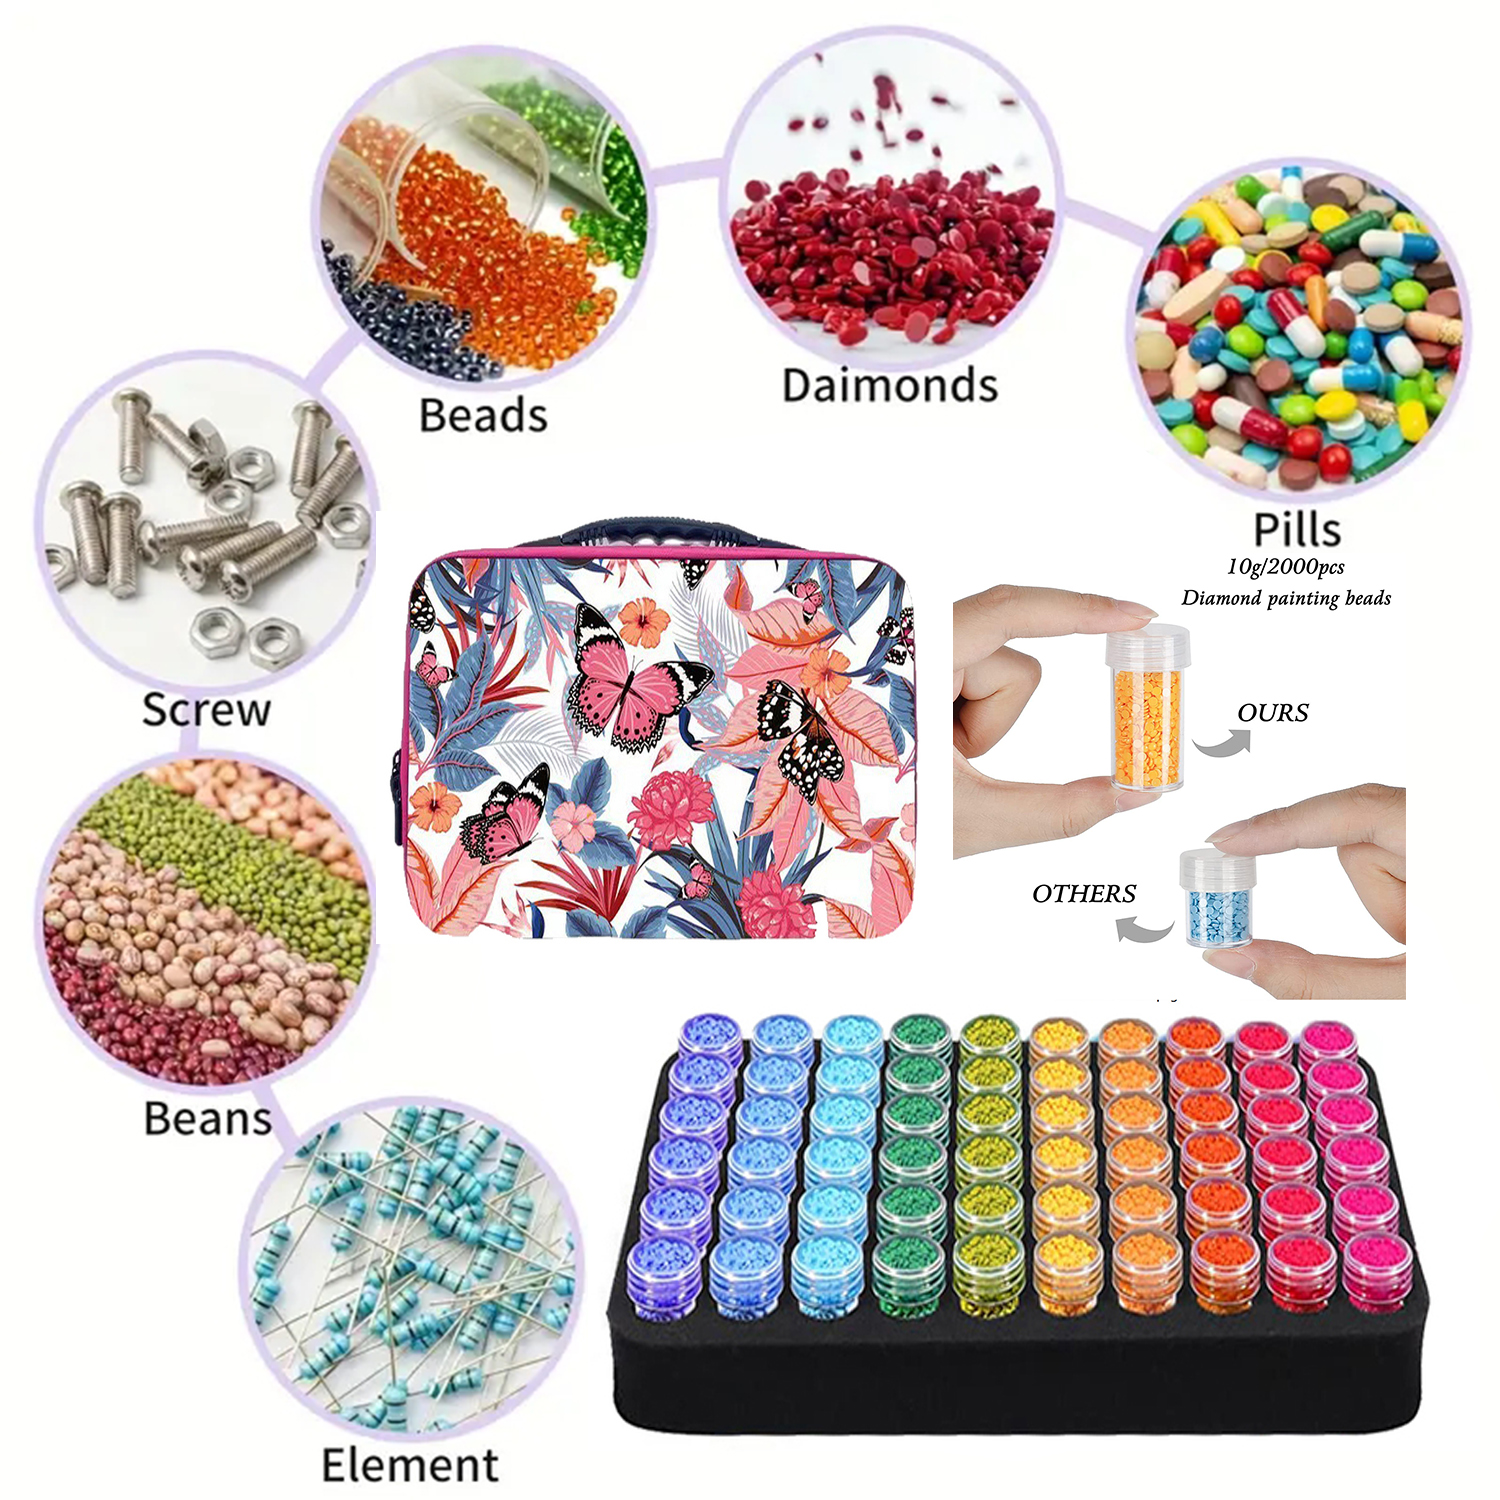 Diamond Painting Kits, beads and accessories, Arts & Crafts